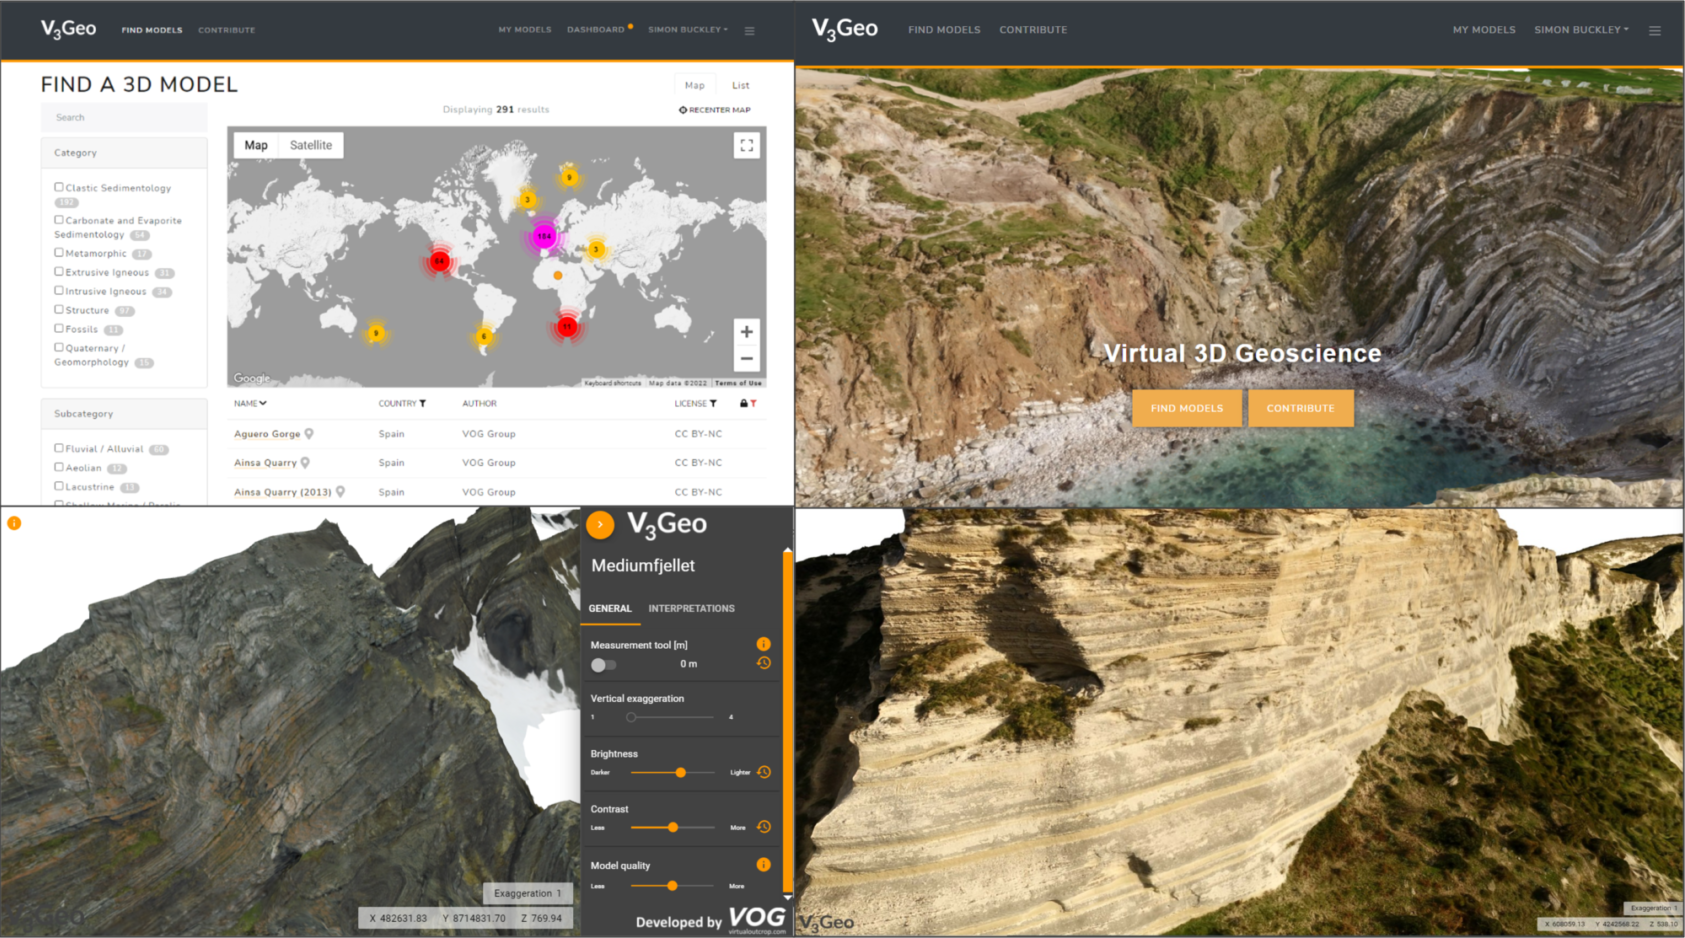 , V3Geo online 3D model database showing search and filter tools and examples of 3D web viewer allowing interactive exploration of the model content (Mediumfjellet, VOG Group, https://v3geo.com/model/142; Aspalmo, VOG Group, https://v3geo.com/model/71)., Figure8, , 